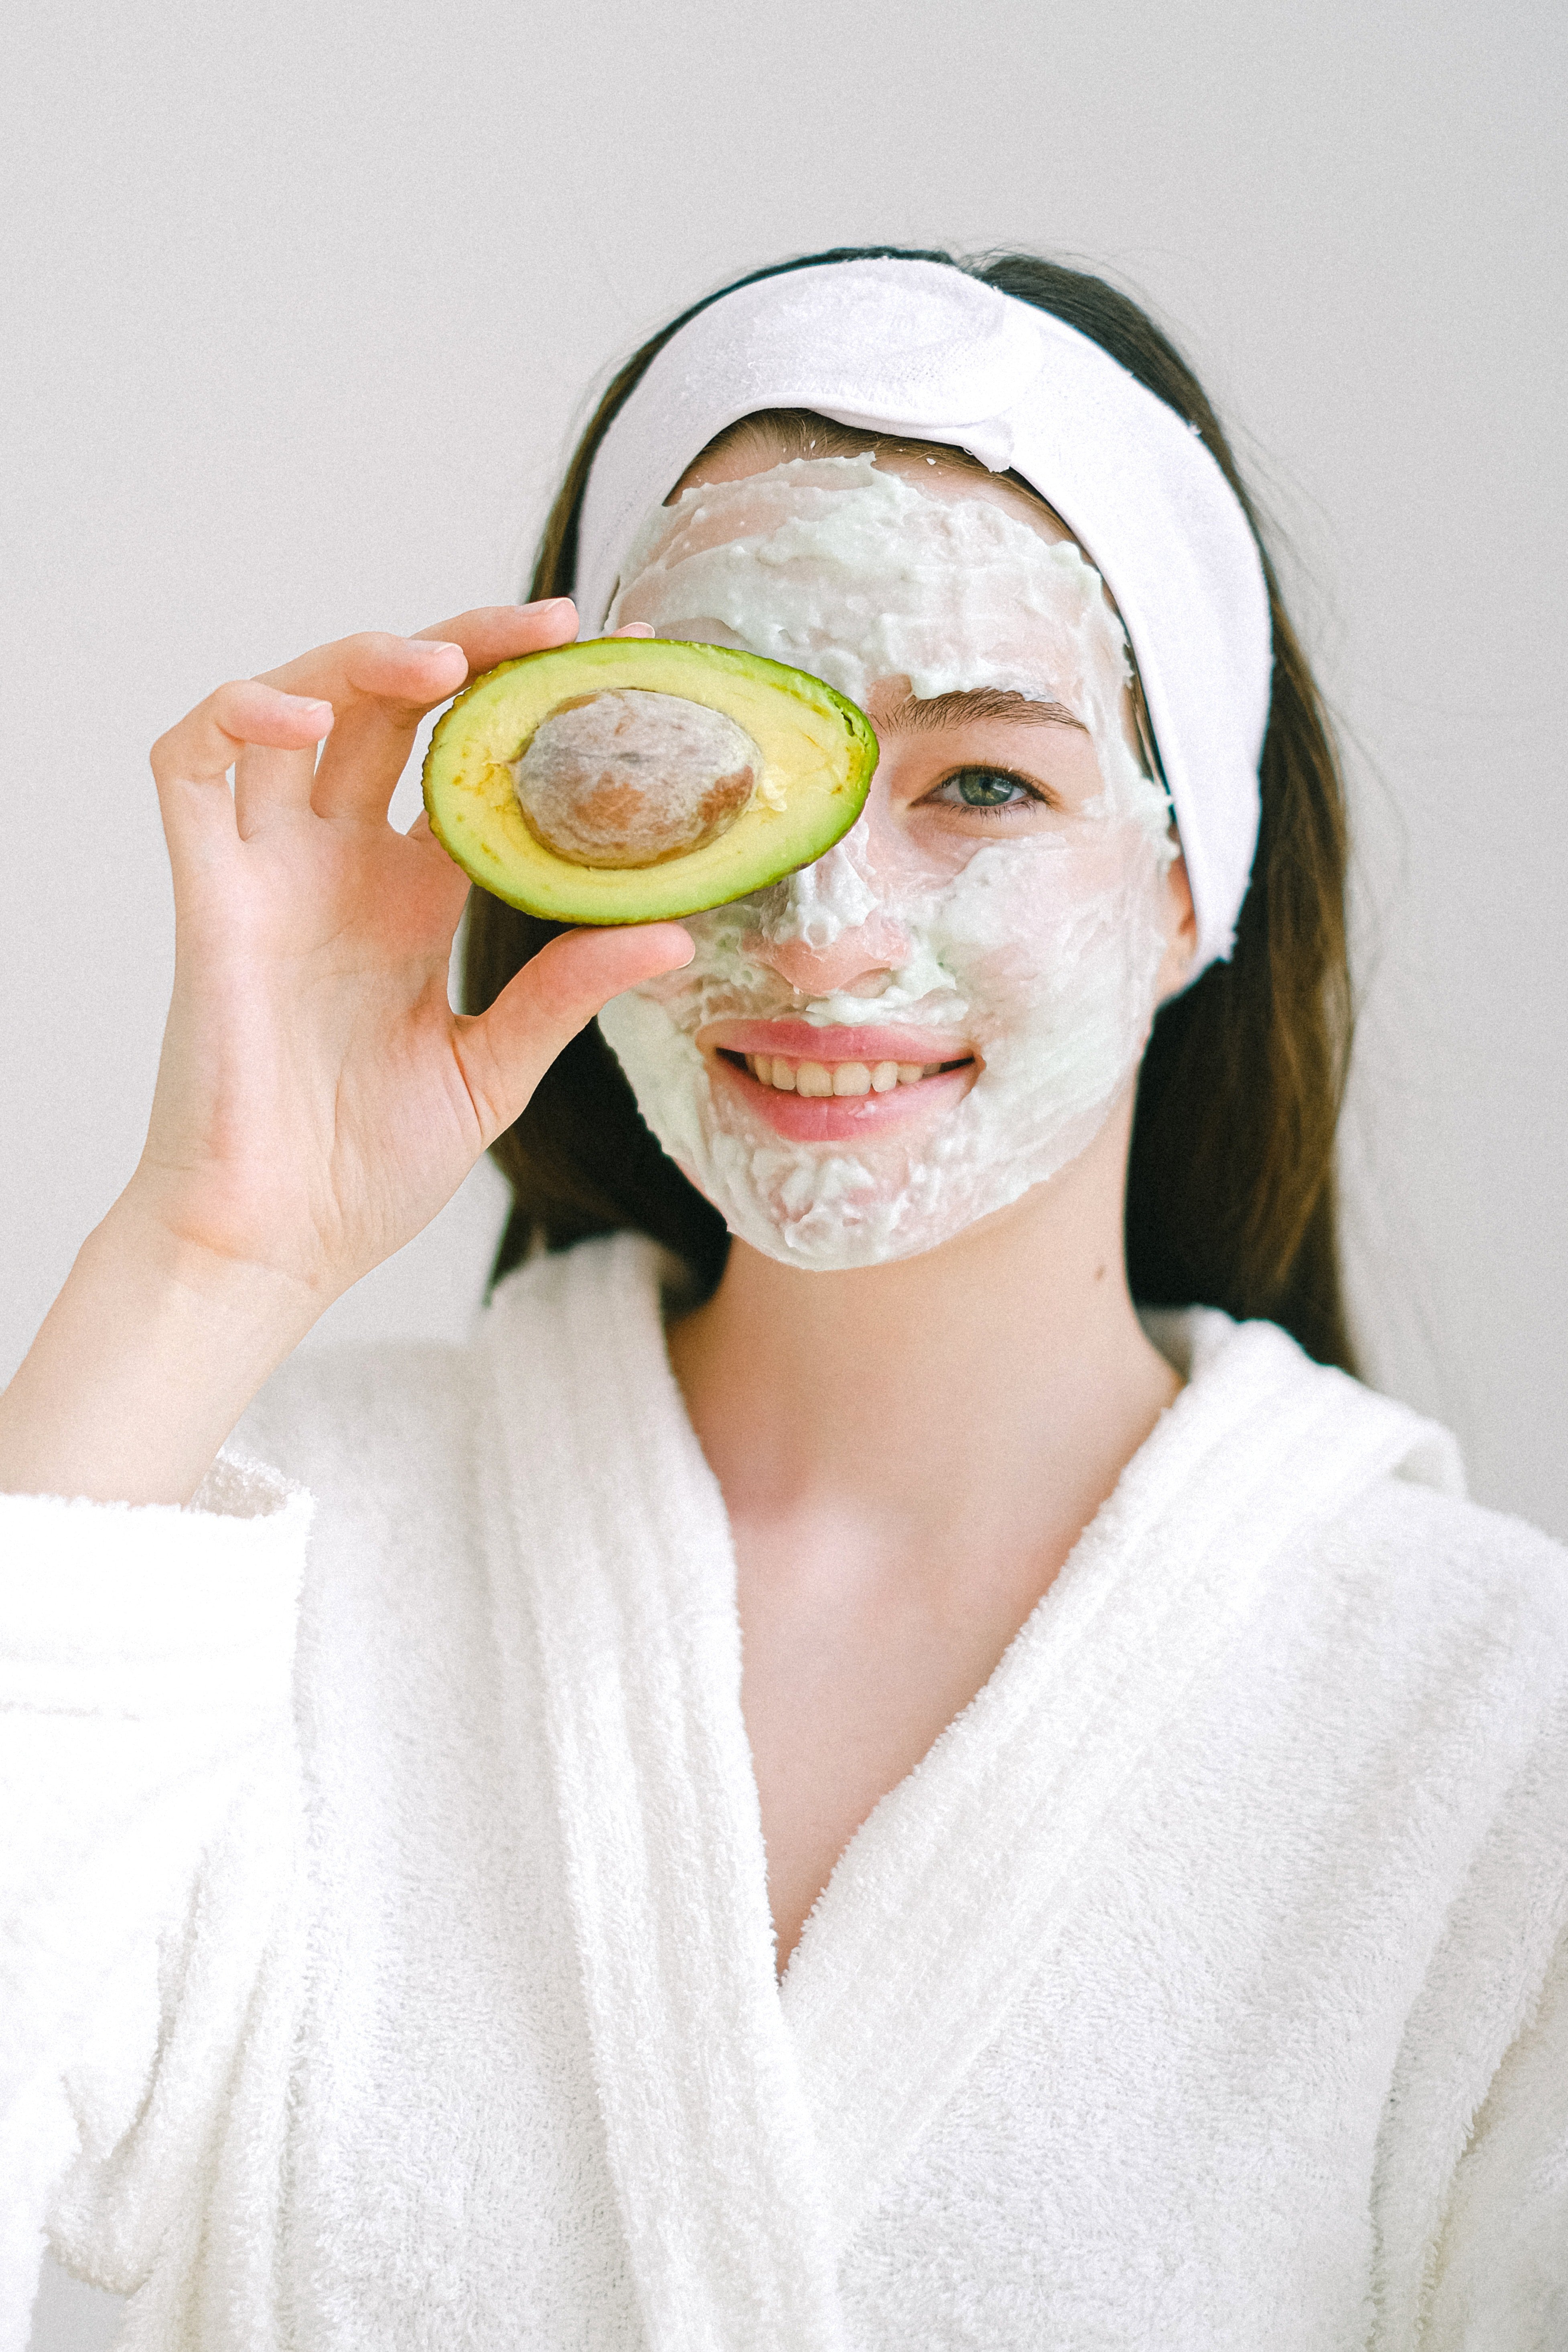 a lady with a face mask holding an avacado